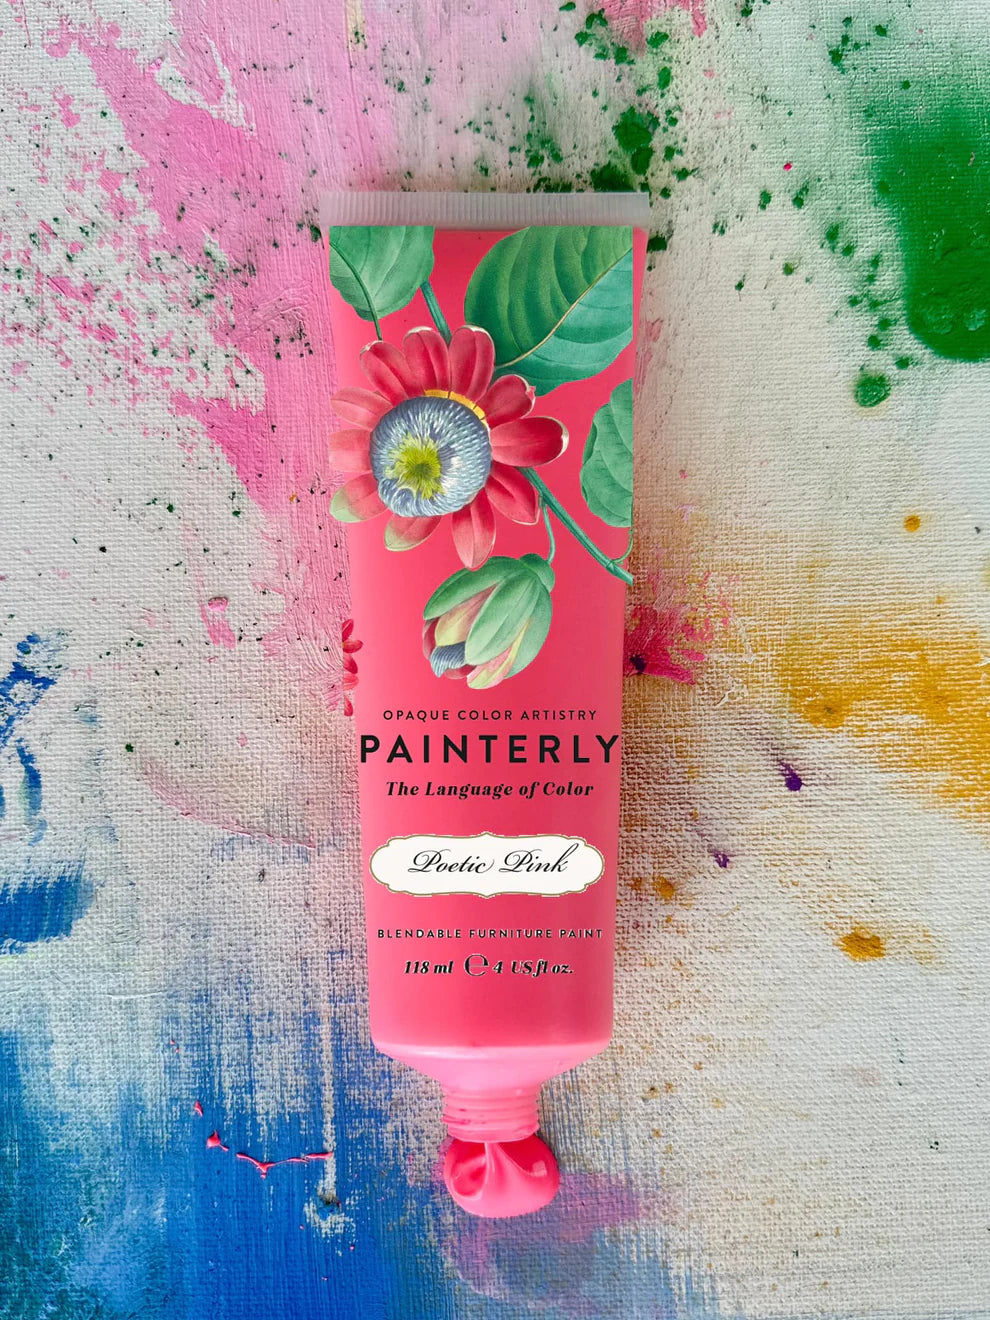 PREORDER - Poetic Pink - Painterly Collection Blendable Furniture Paint by DIY Paint